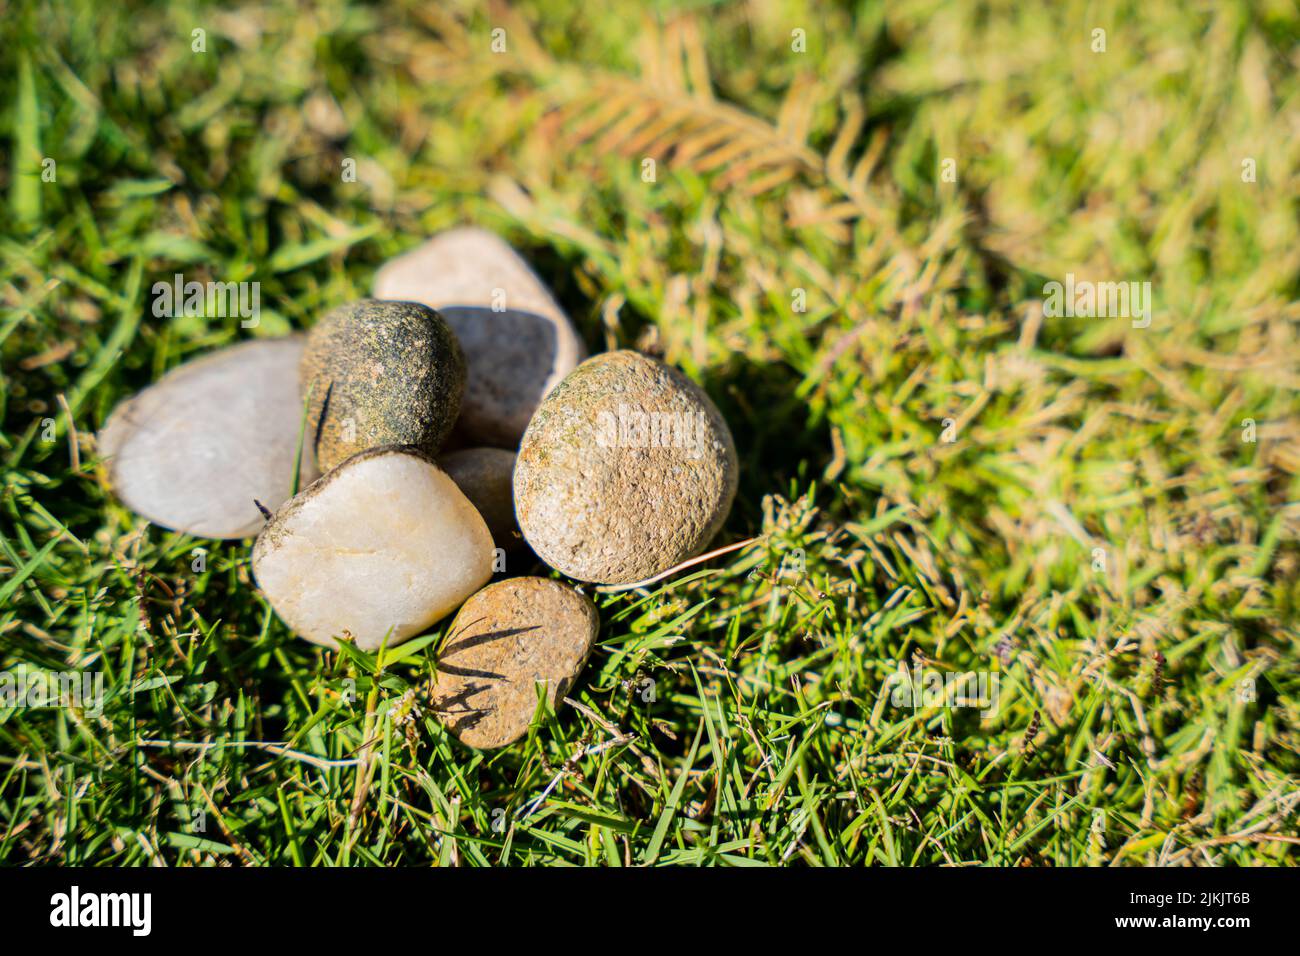 A closeup shot of white Living stones on grass field on a sunny day Stock Photo